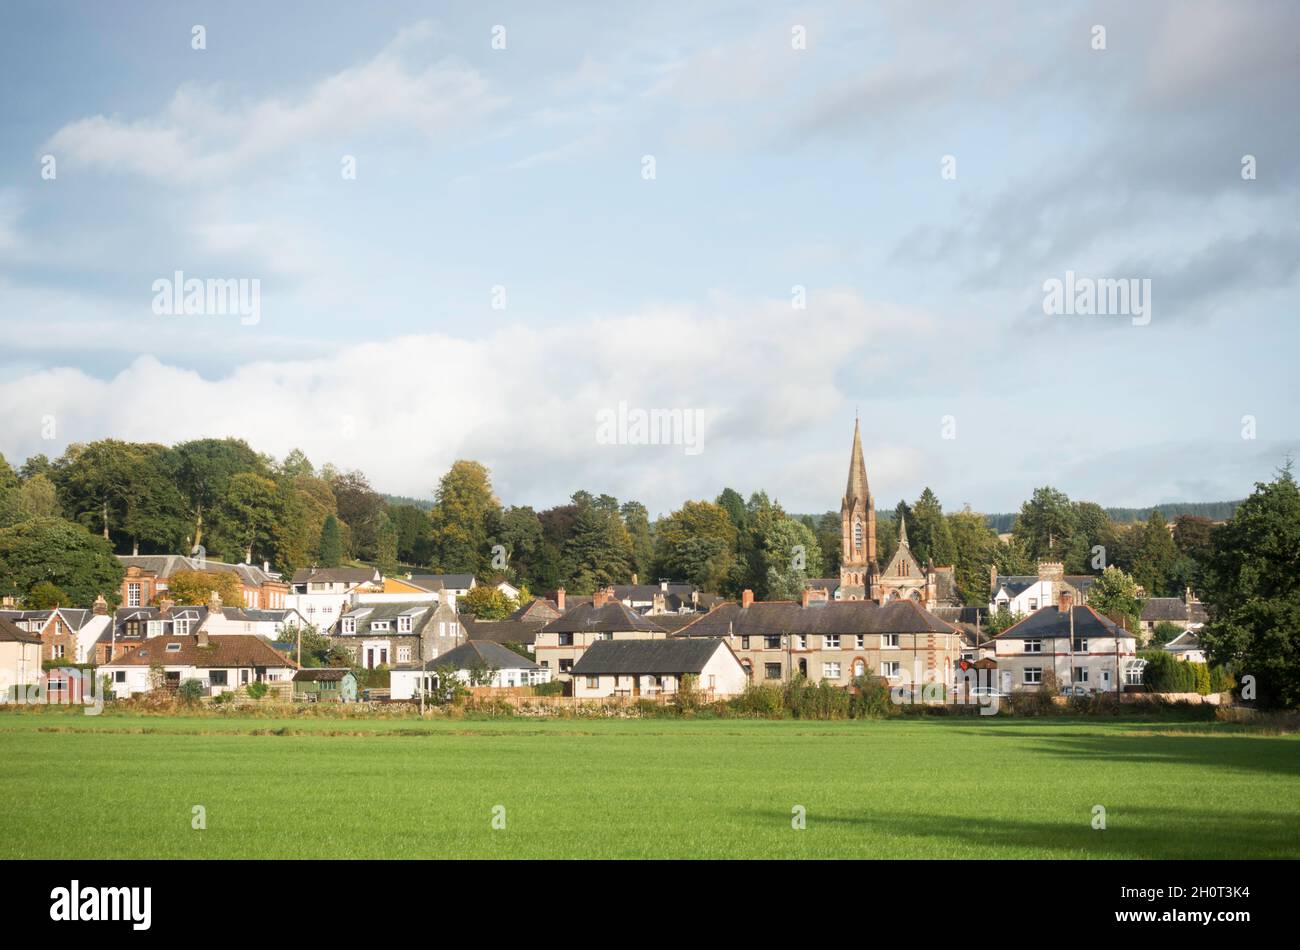 Moffat townscape, including St. Mary's Church, now apartments, in Dumfriesshire, Scotland, UK Stock Photo